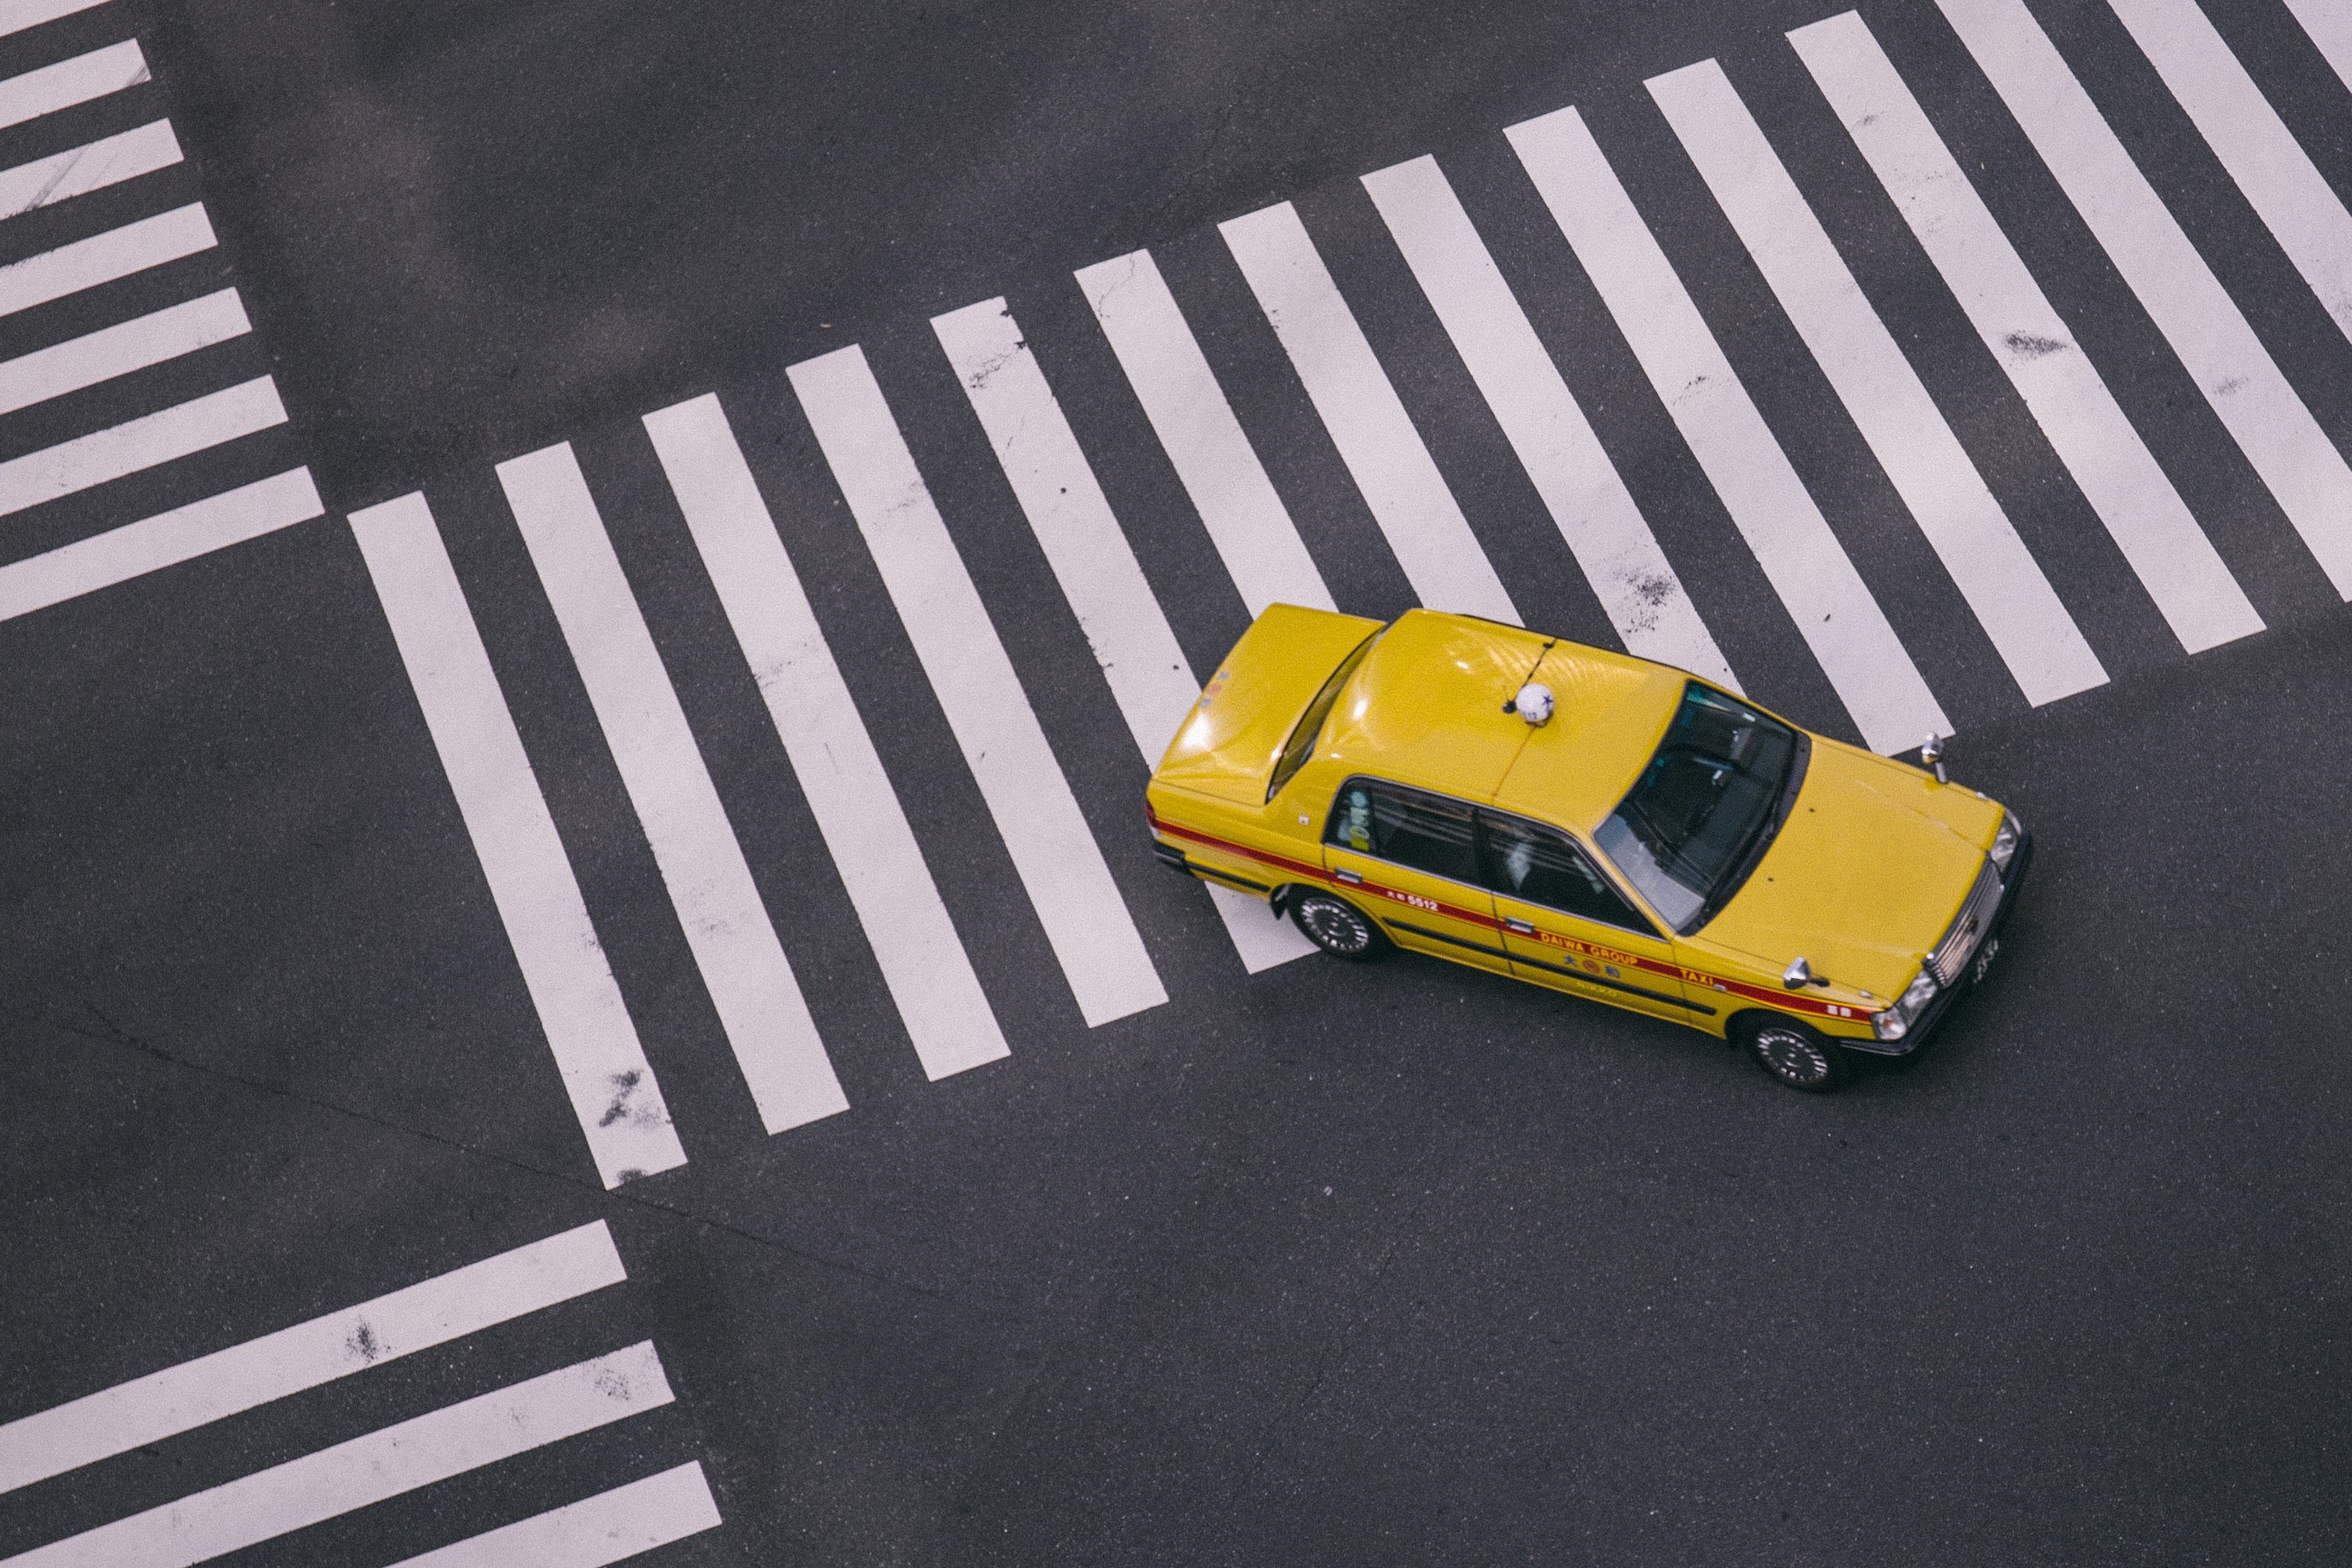 Katherine took a taxi to meet Roger & collect her rent. | Source: Unsplash